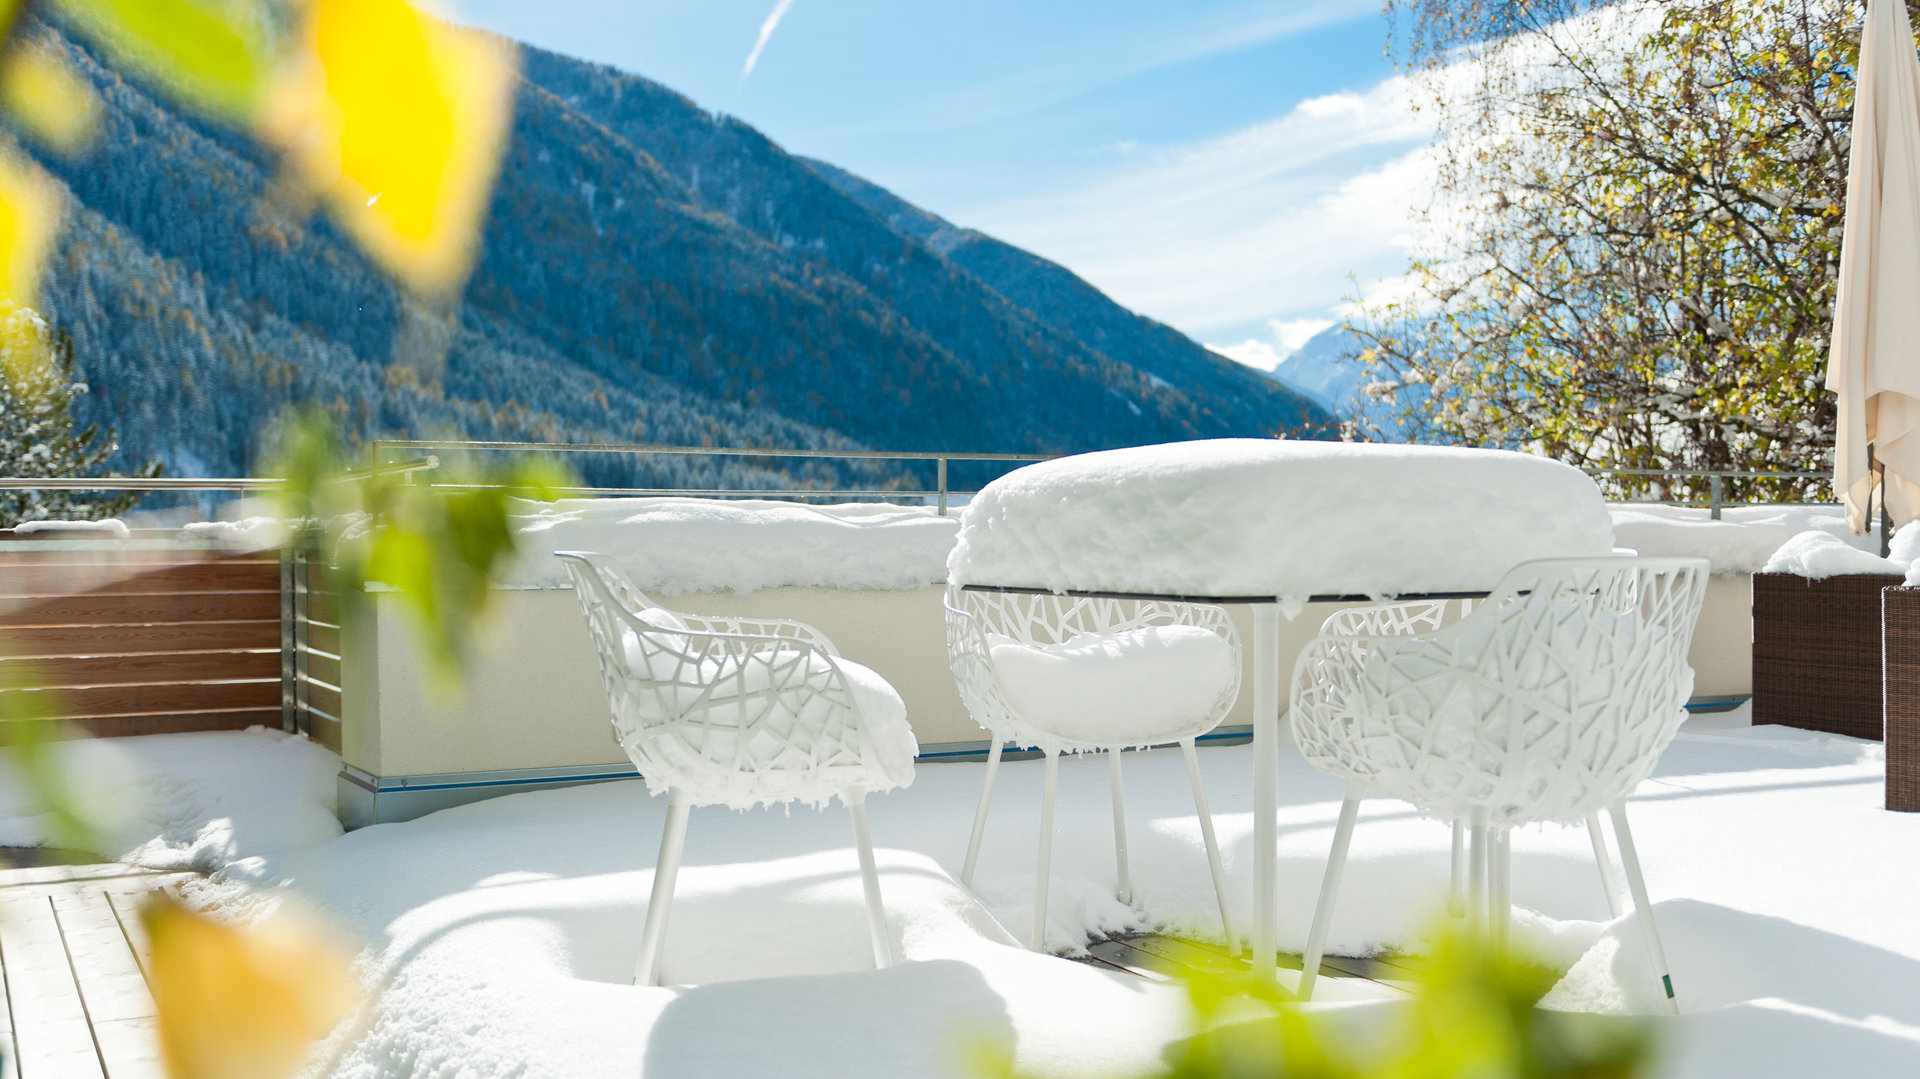 Hotel in Ultental Valley with sunny terrace and mountain view.